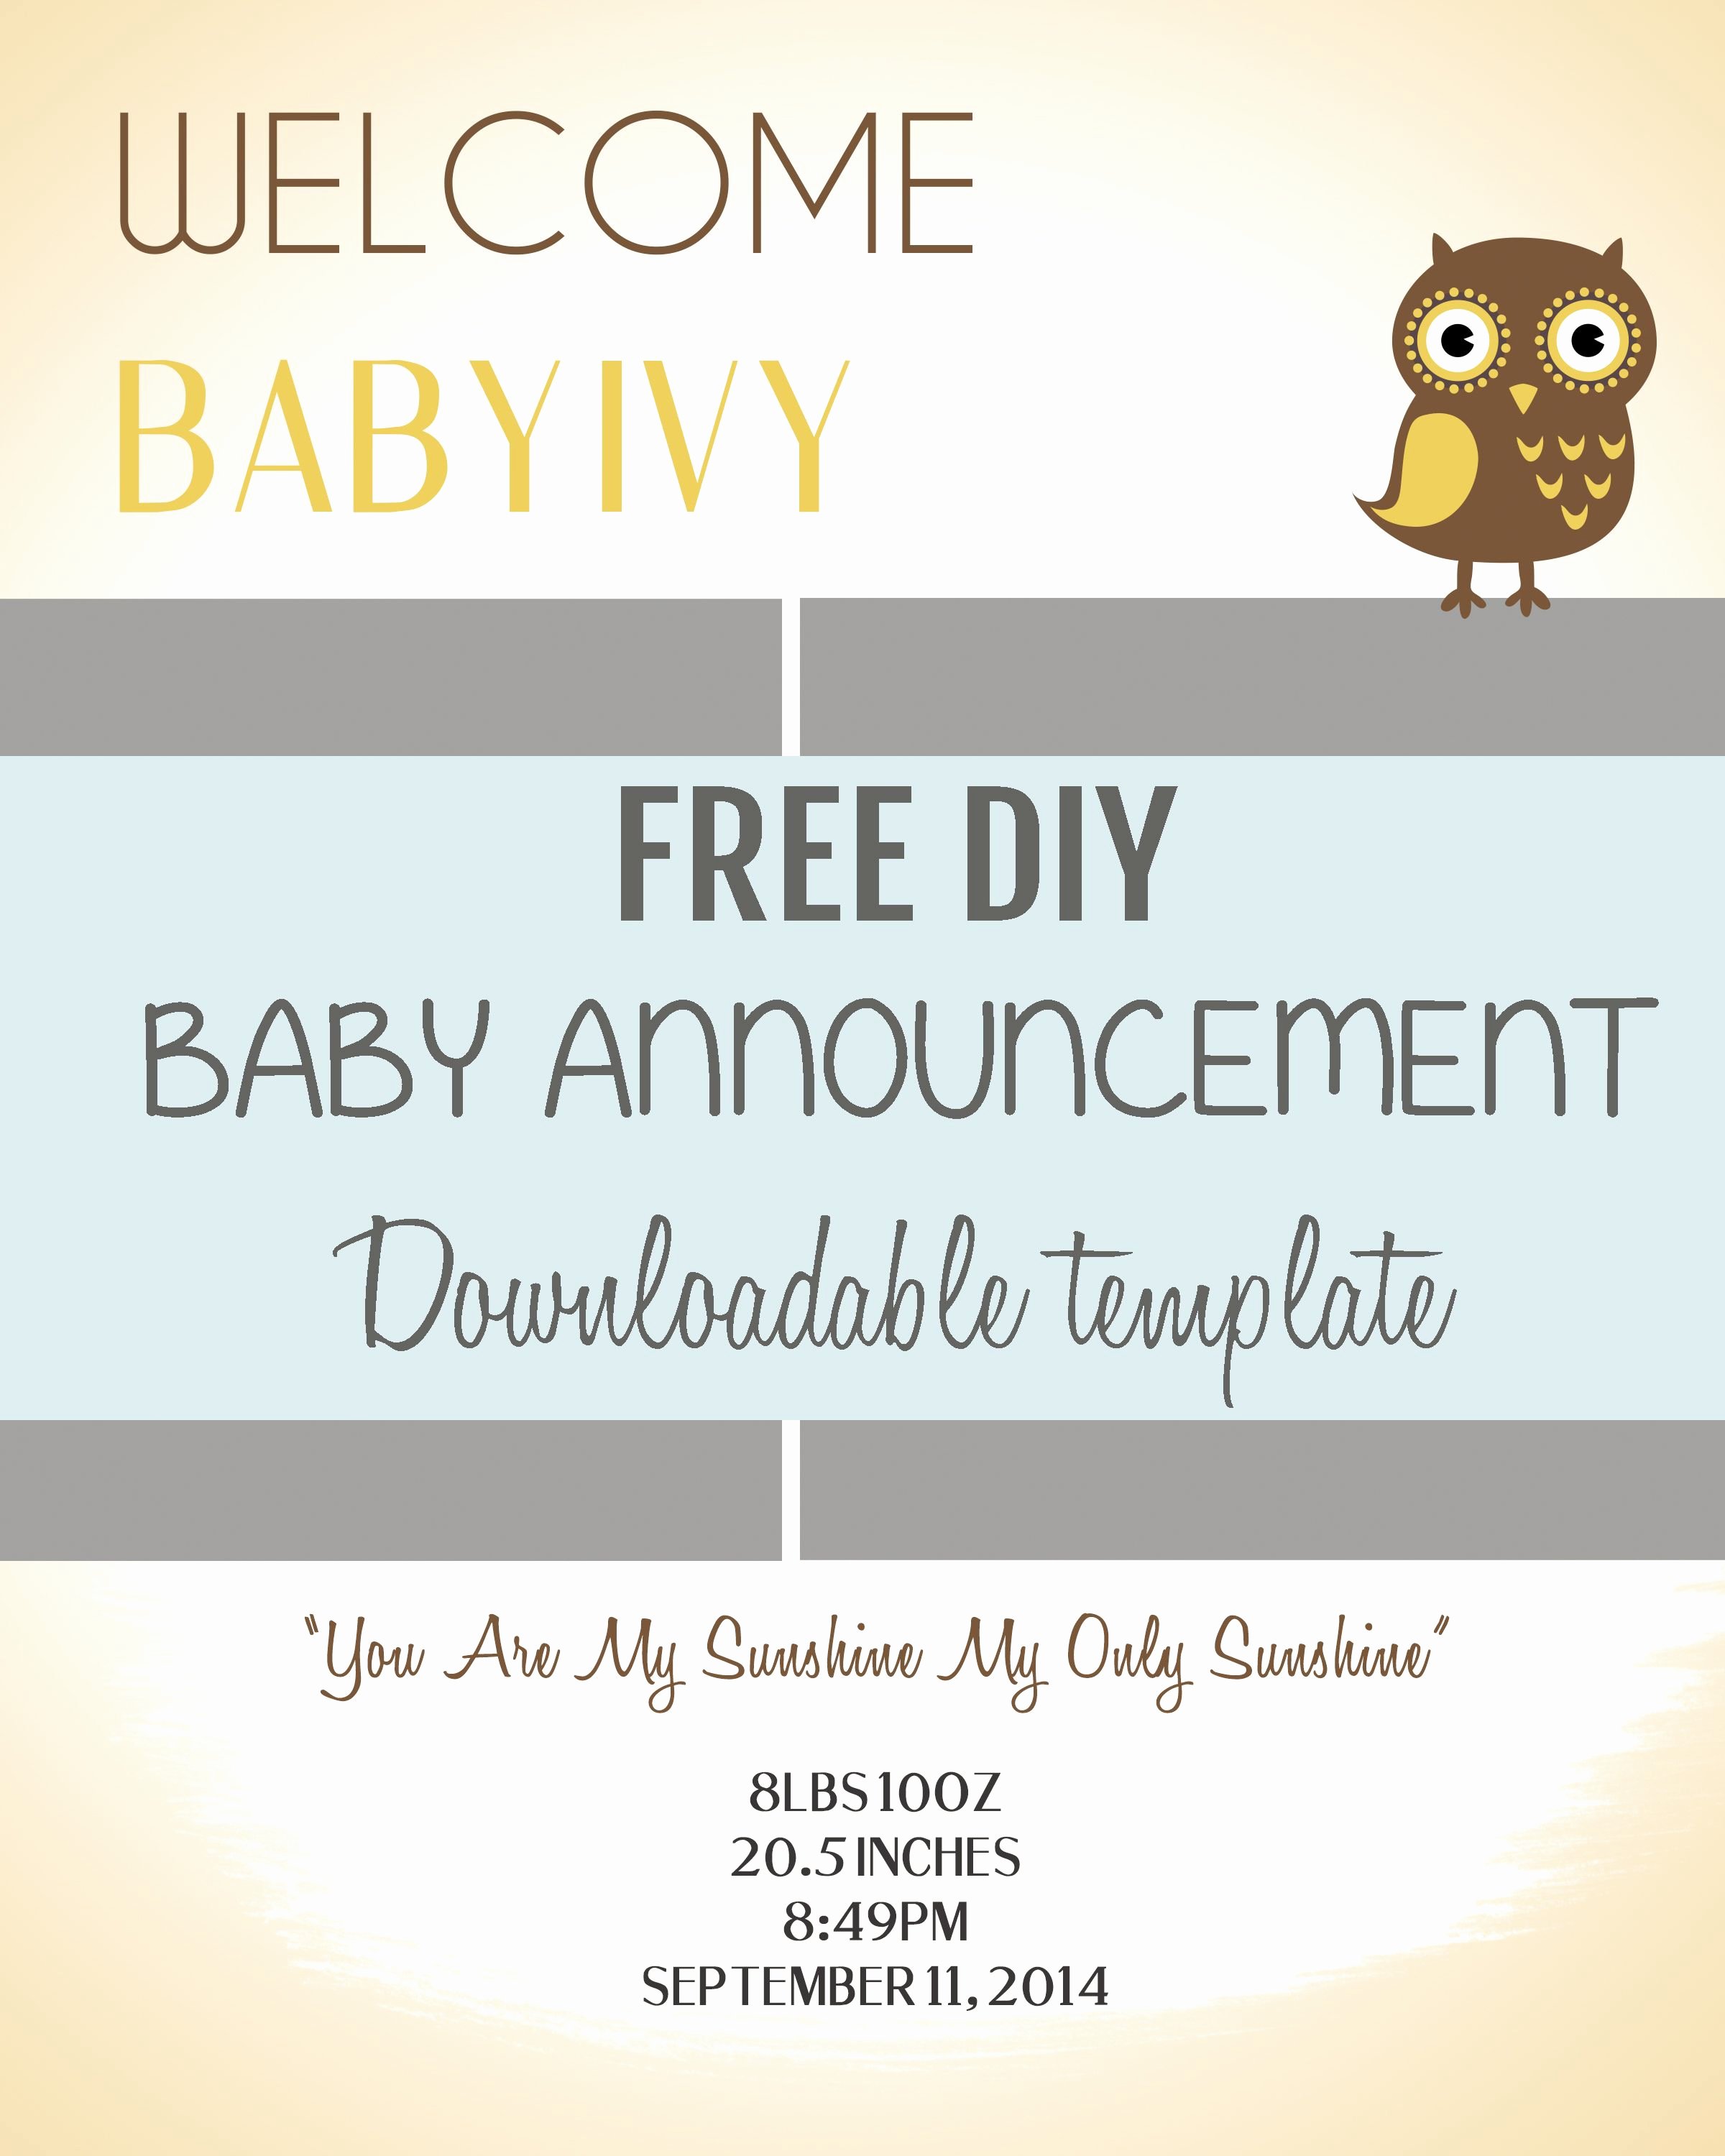 Baby Announcement Email New Diy Baby Announcement Template Pee Wee